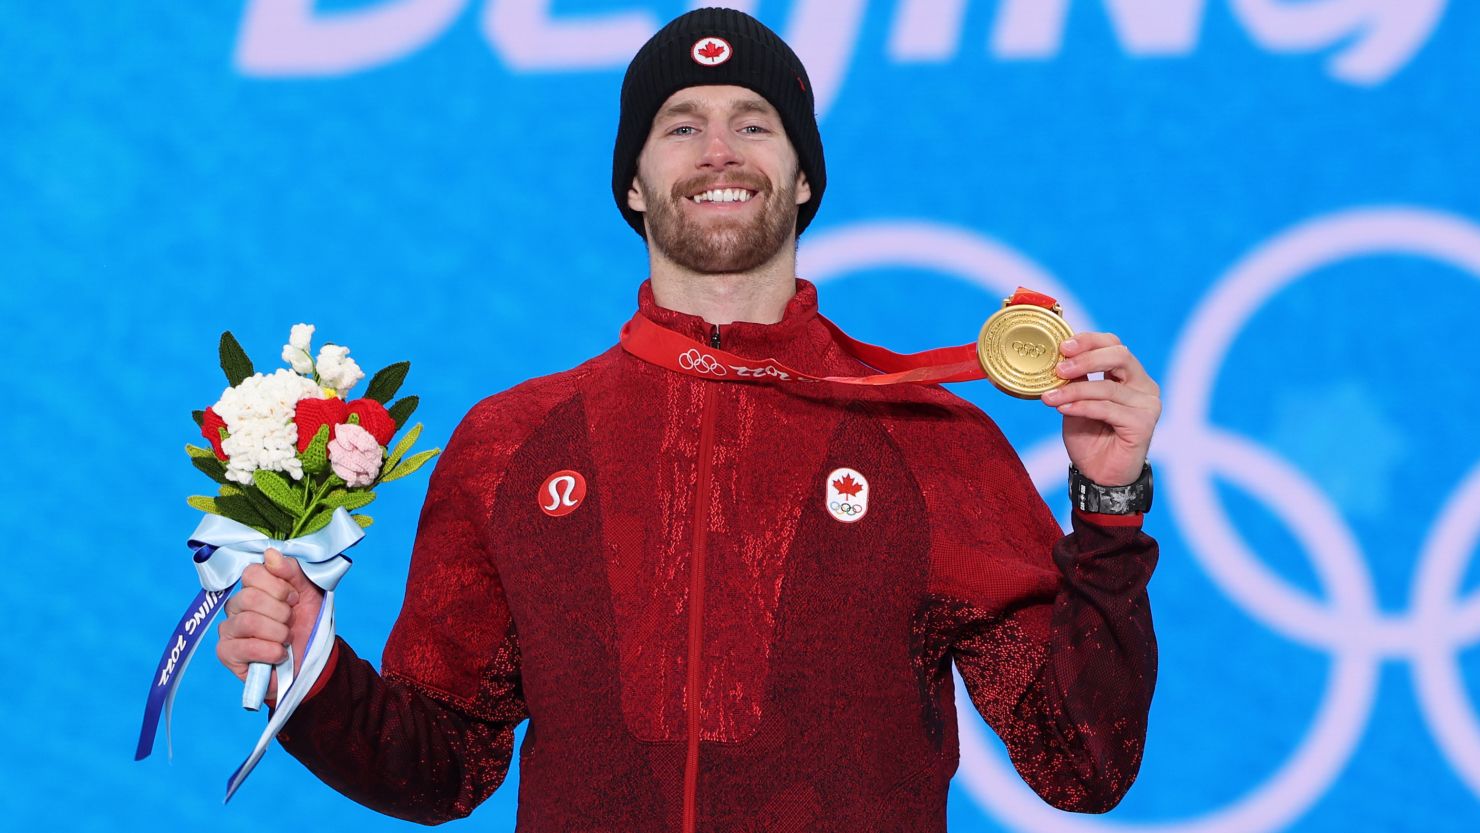 Gold medalist Max Parrot celebrates with his medal during the men's snowboarding slopestyle medal ceremony at Medal Plaza on February 7, 2022.